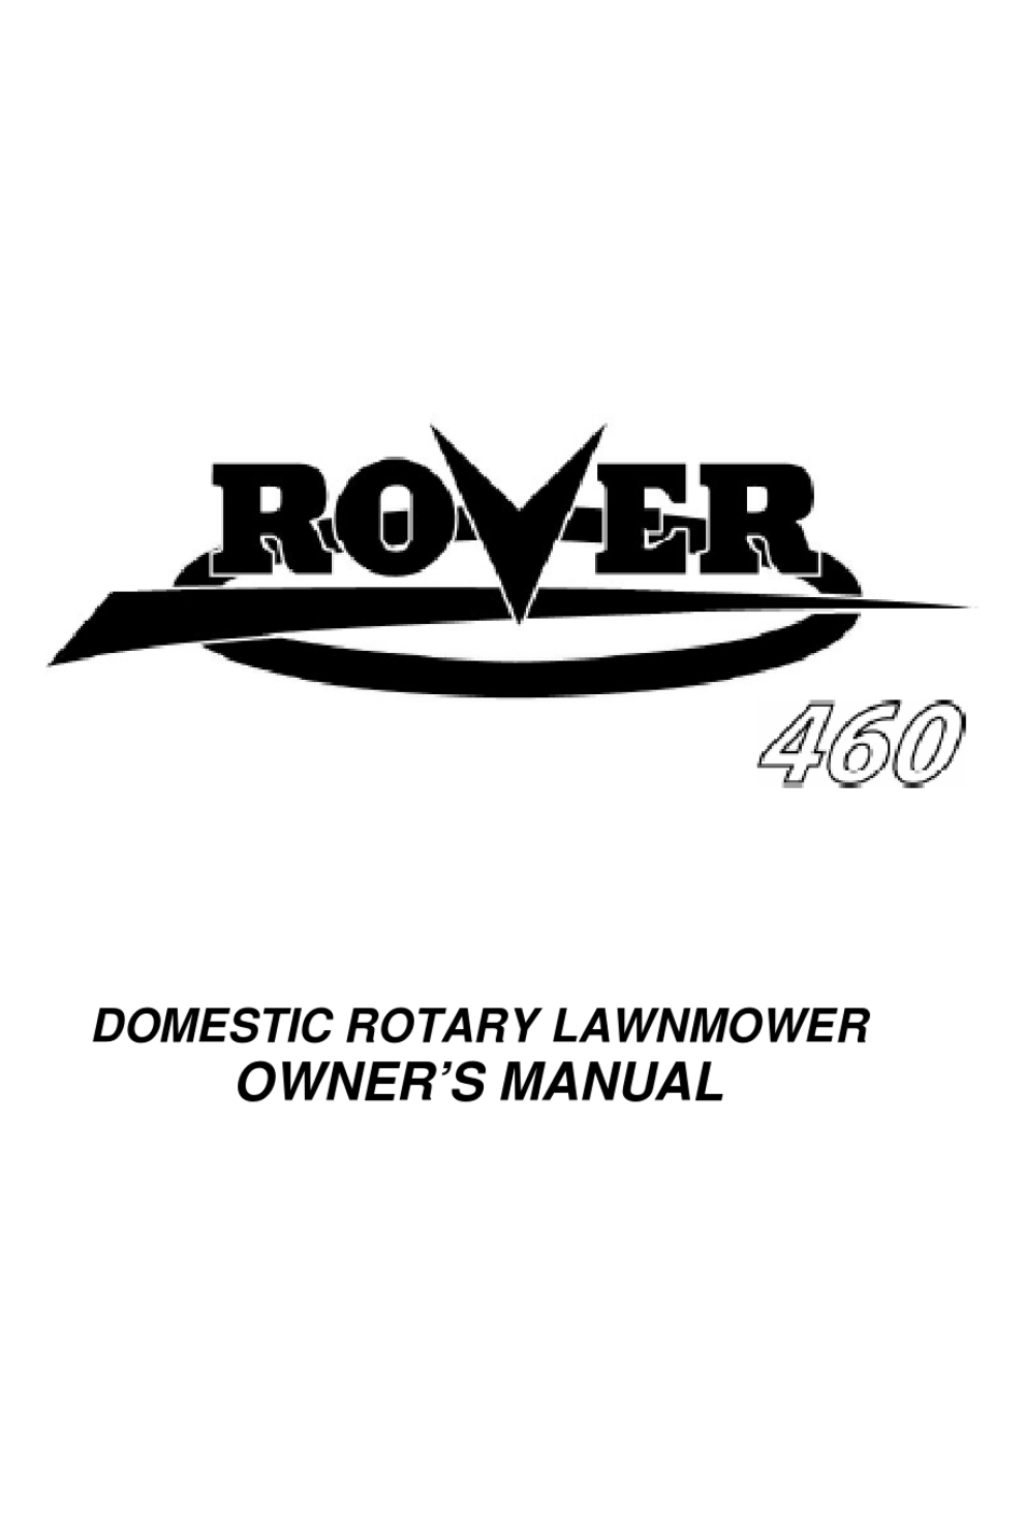 Picture of: ROVER  OWNER’S MANUAL Pdf Download  ManualsLib